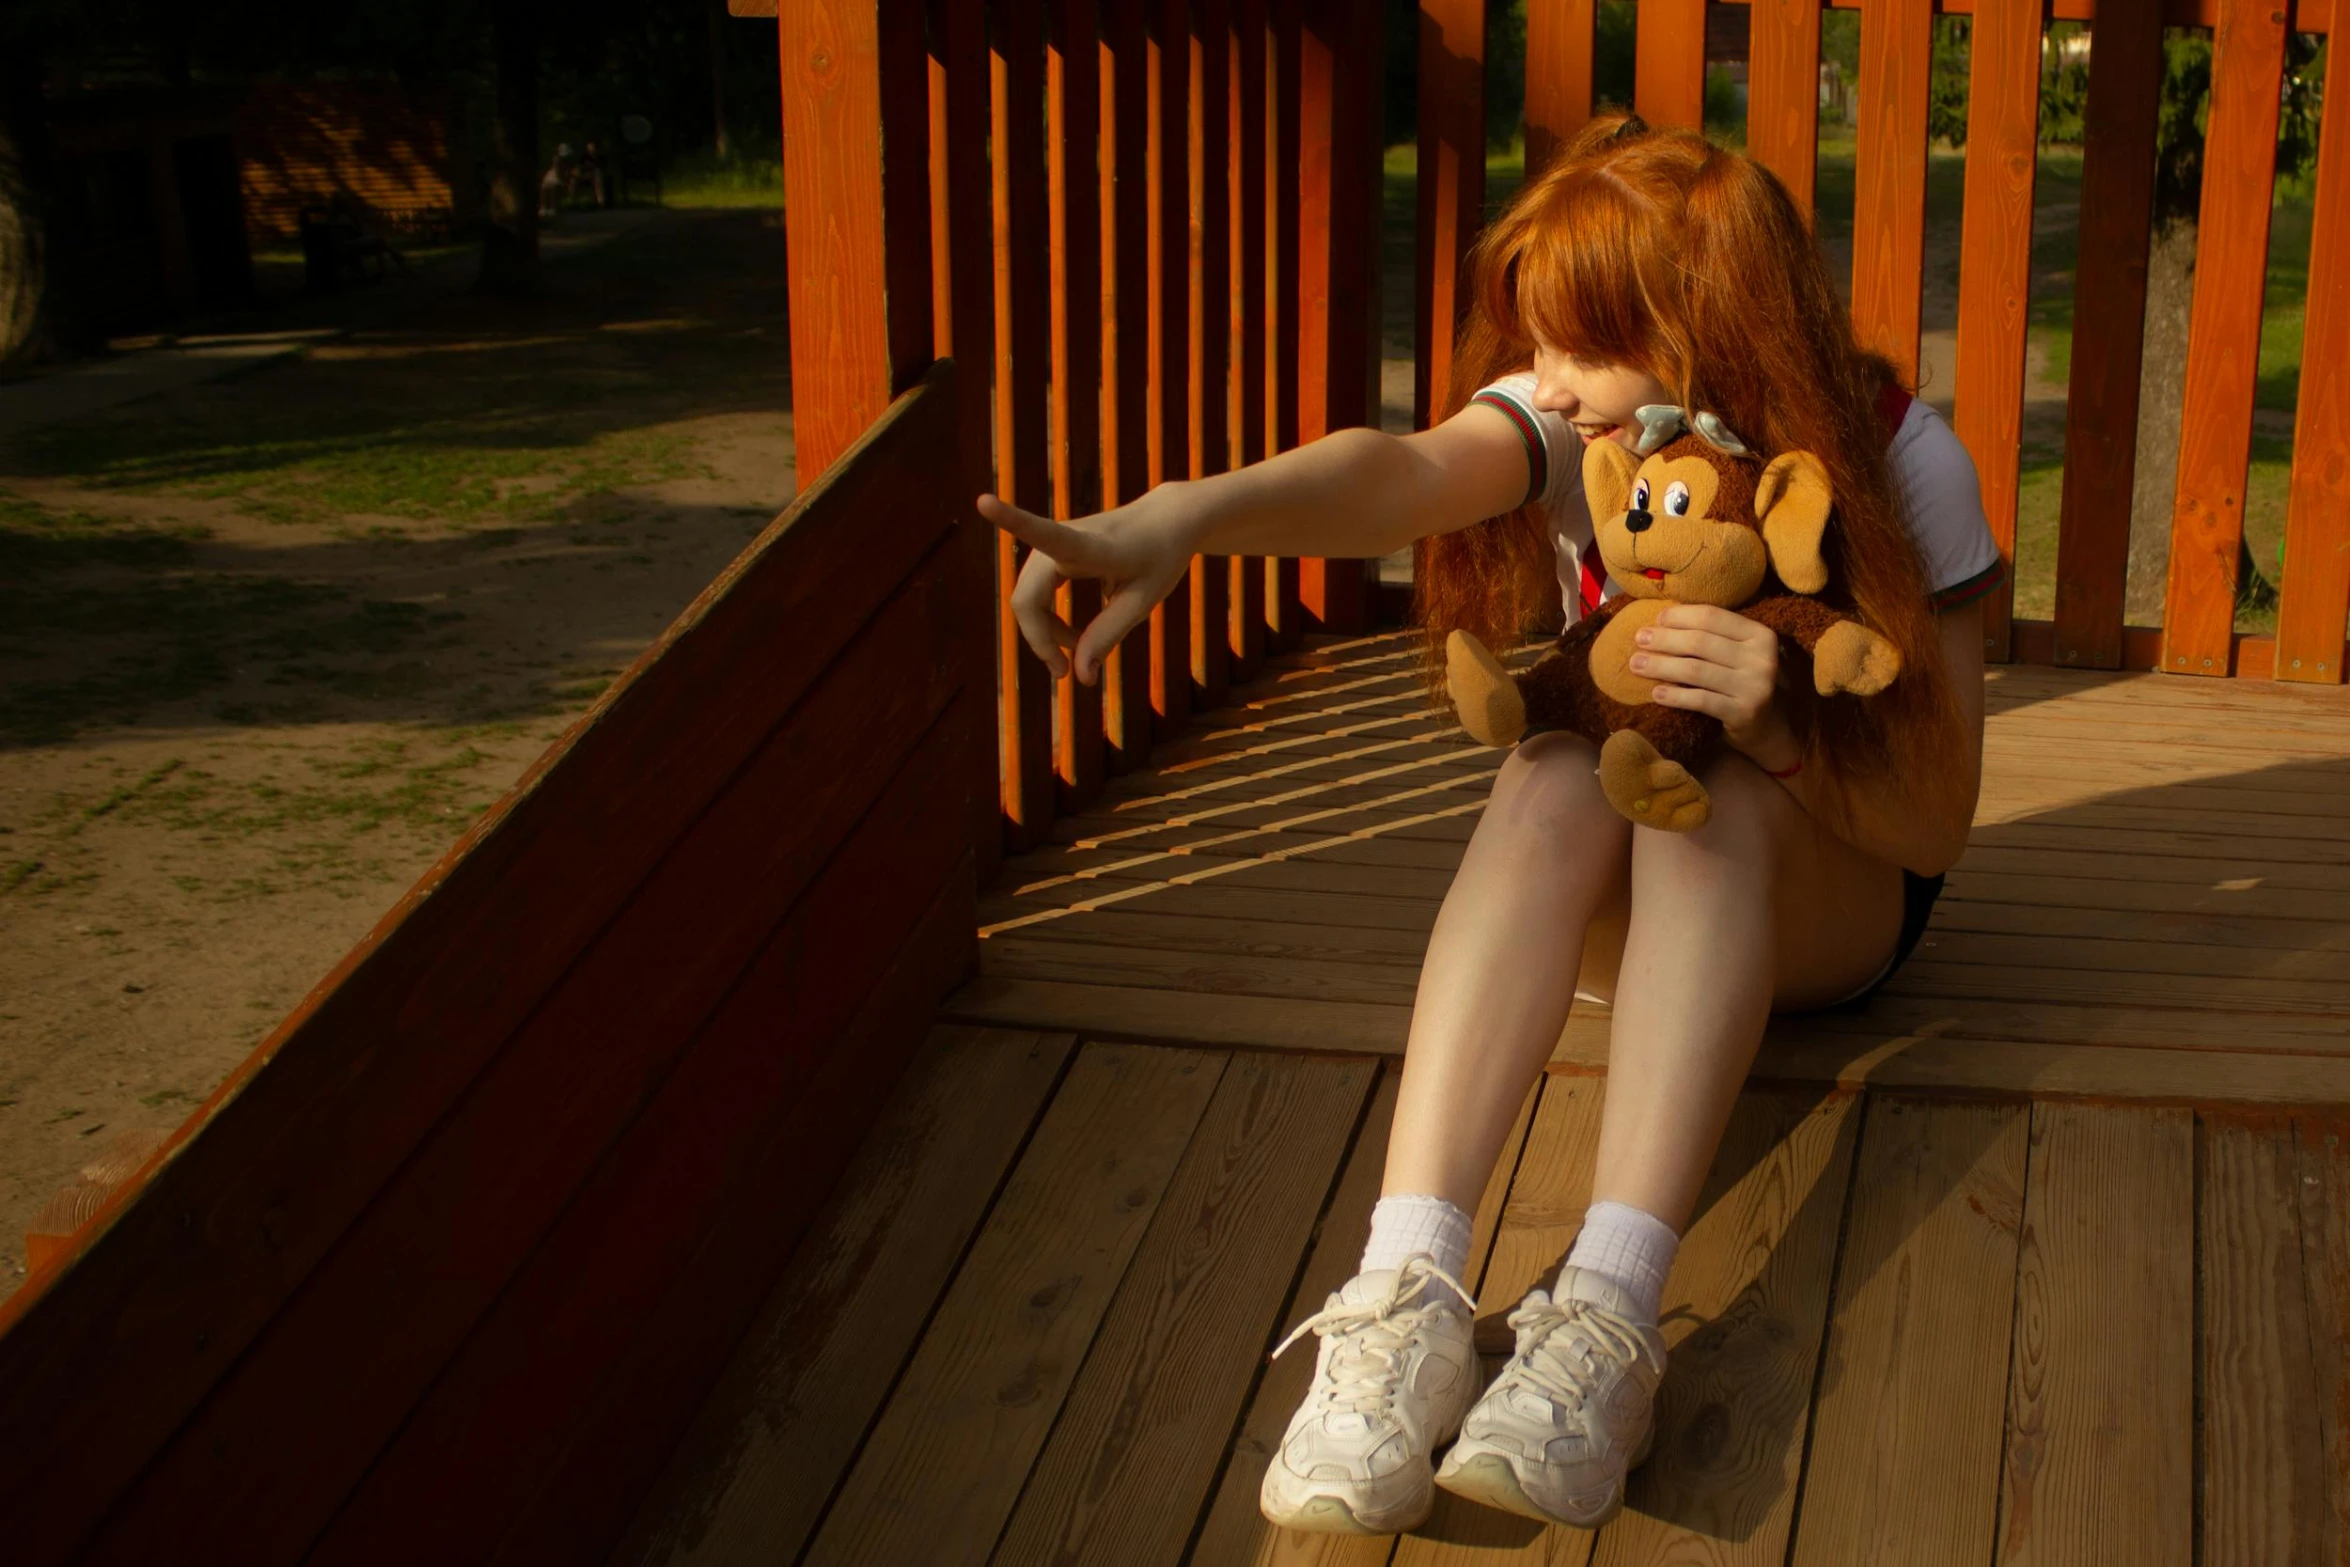 a woman sitting on a wooden deck holding a teddy bear, unsplash, realism, asuka langley sohryu, nightmare in the park, ball jointed doll, depressing image